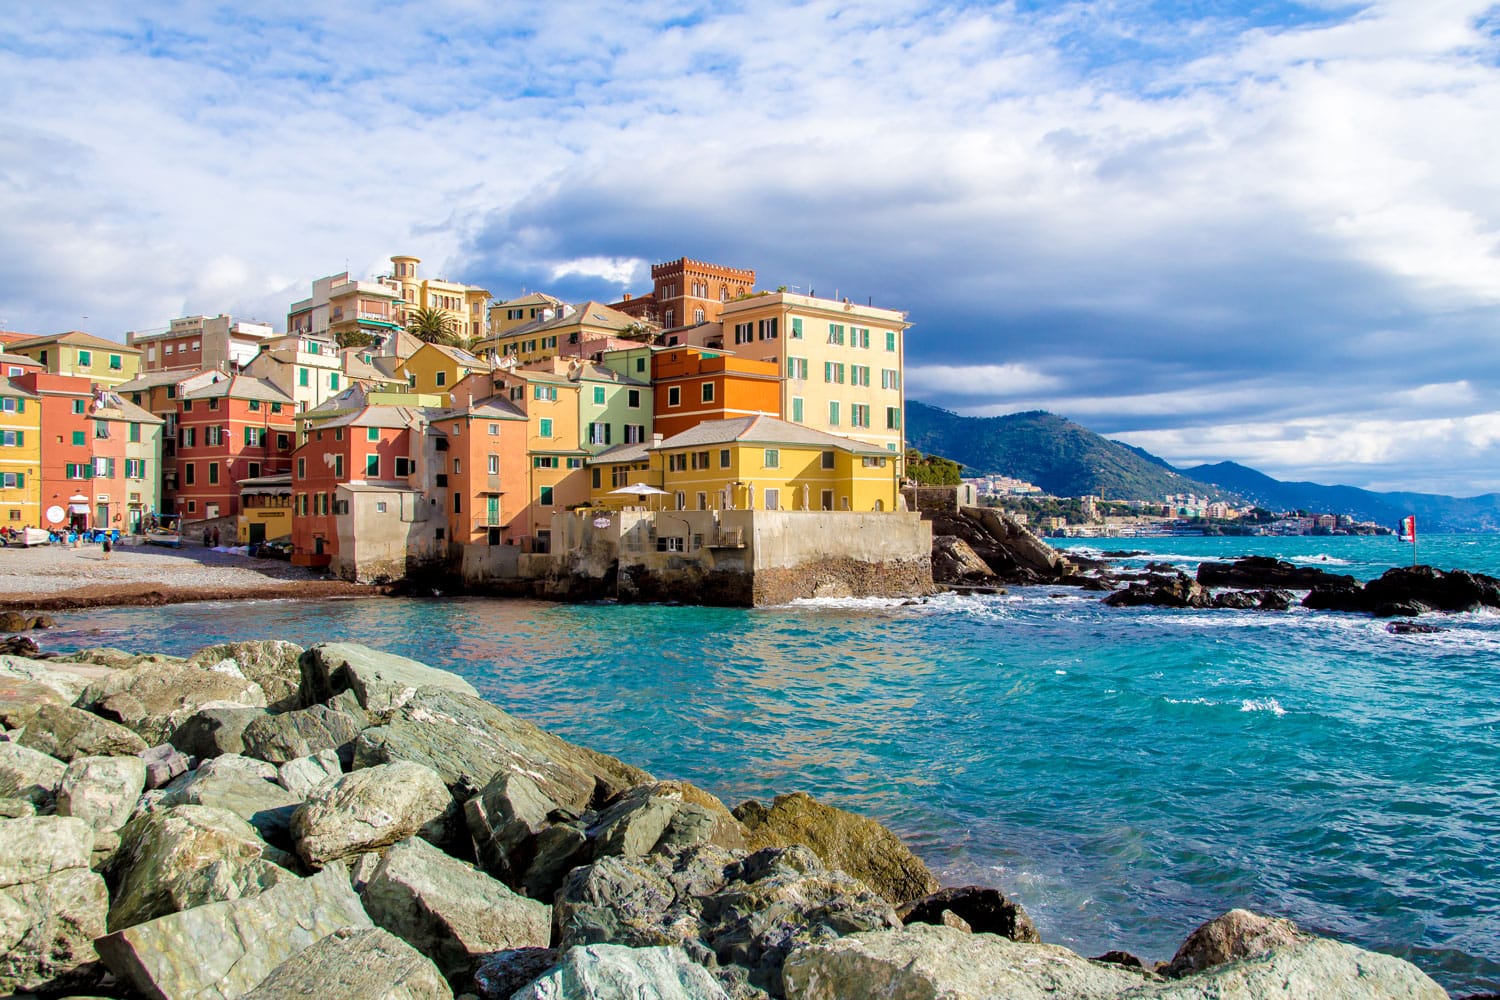 Boccadasse, a district of Genoa in Italy, looks like a small village by the sea